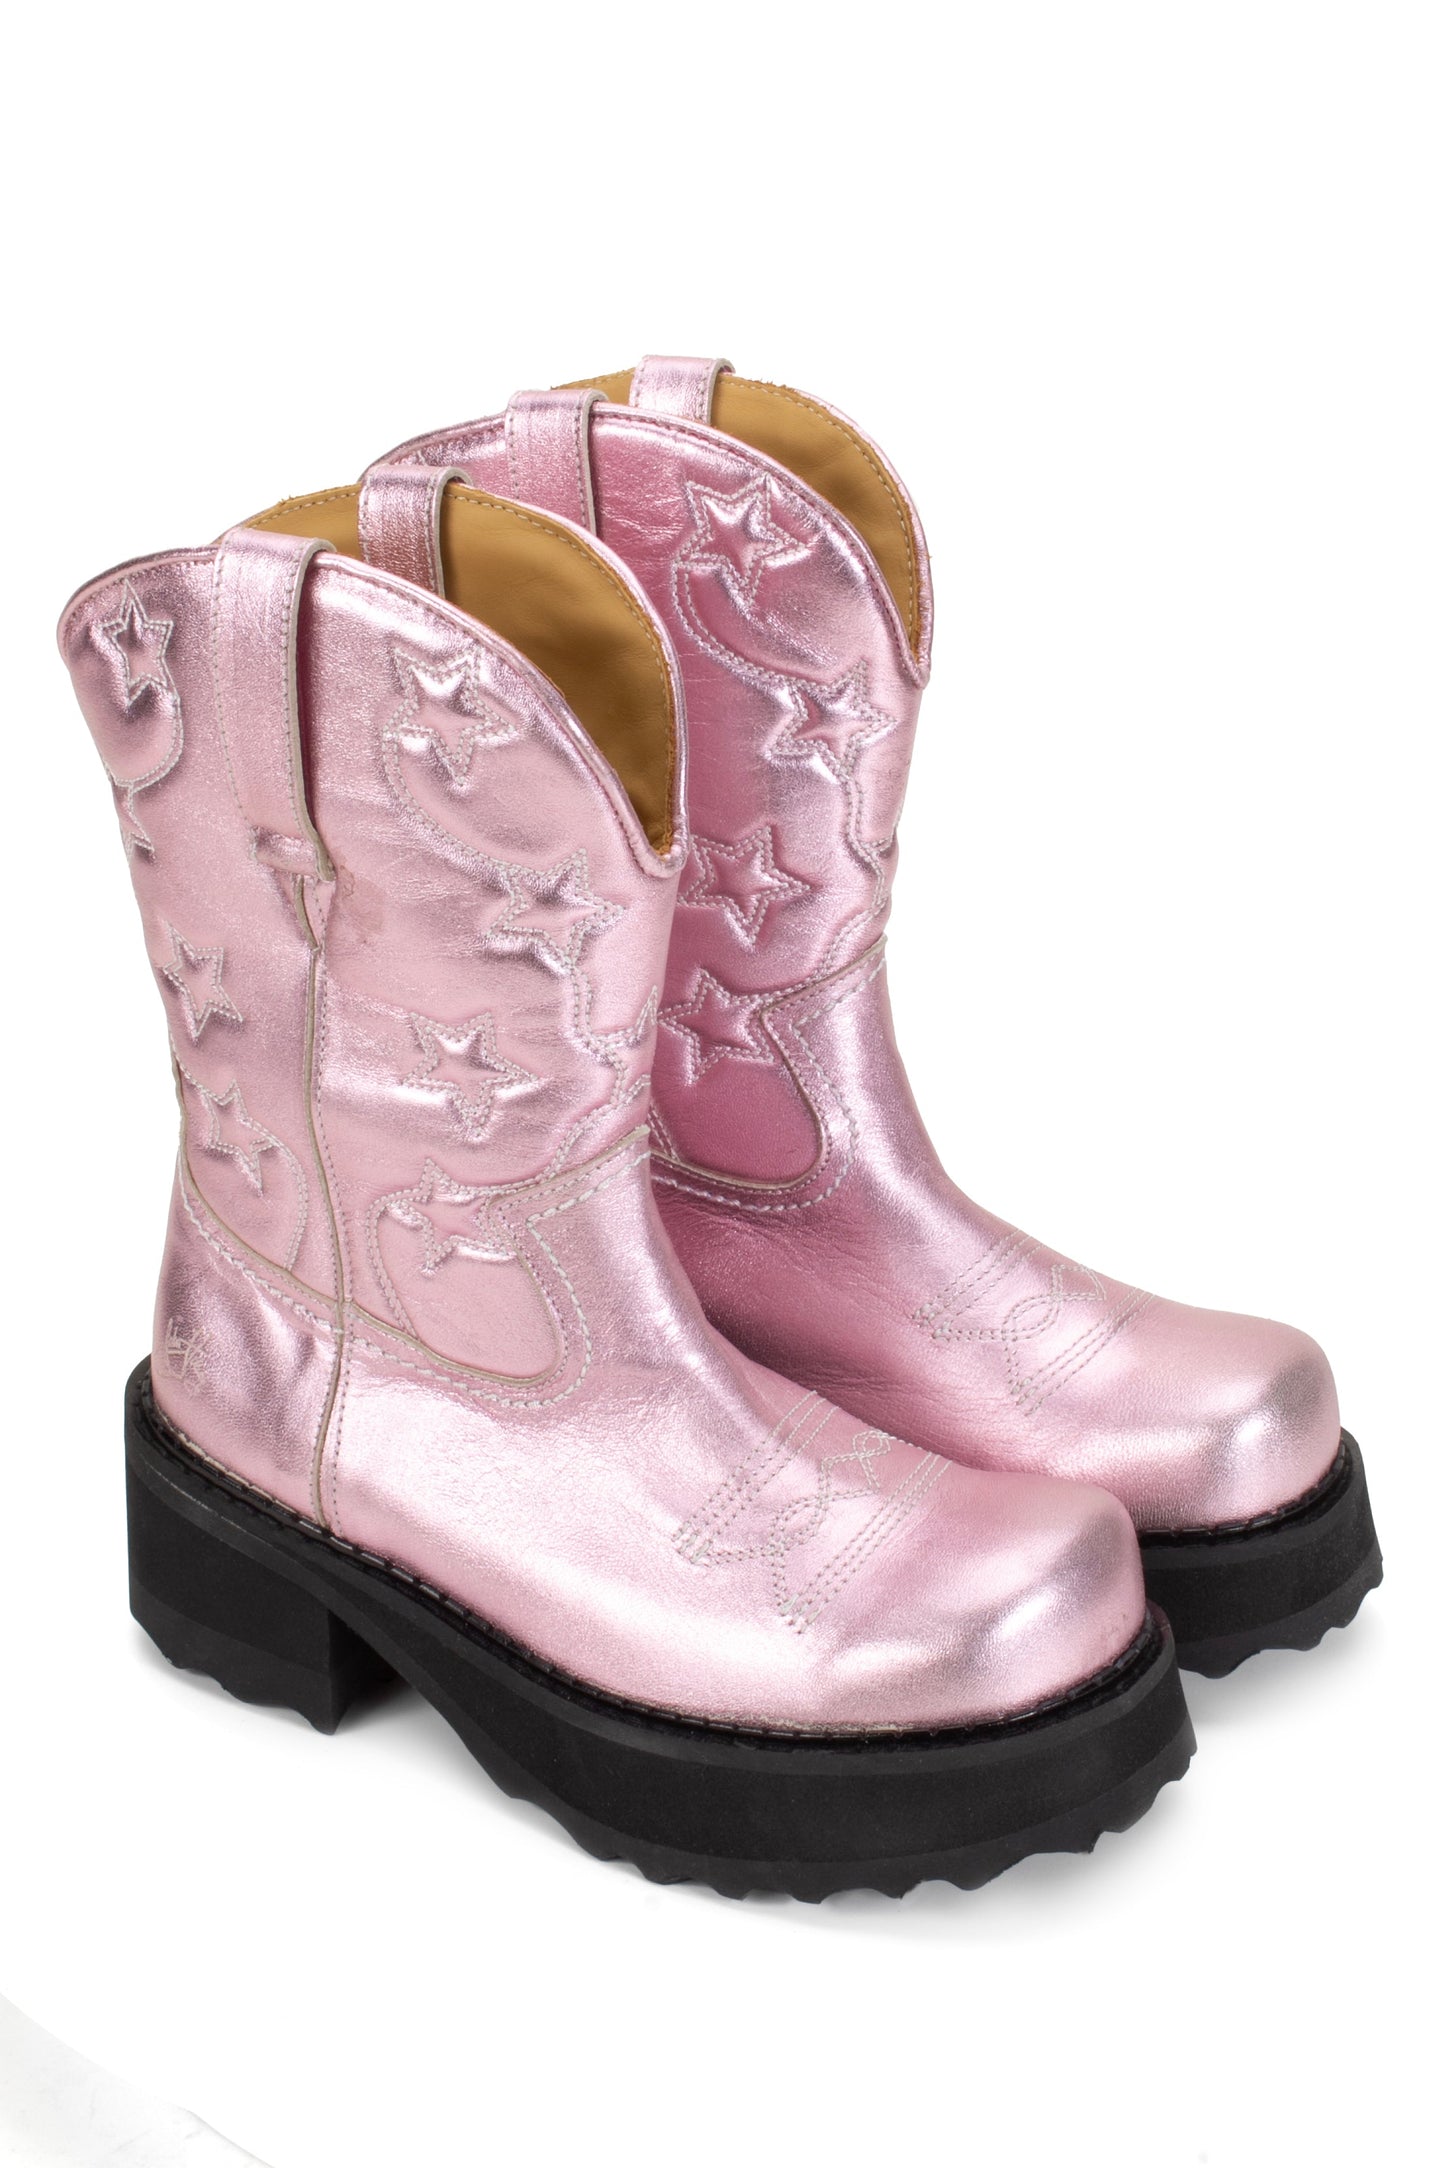 Cowboy Boot, are a pair of pink-colored cowboy-style boots with a high black sole